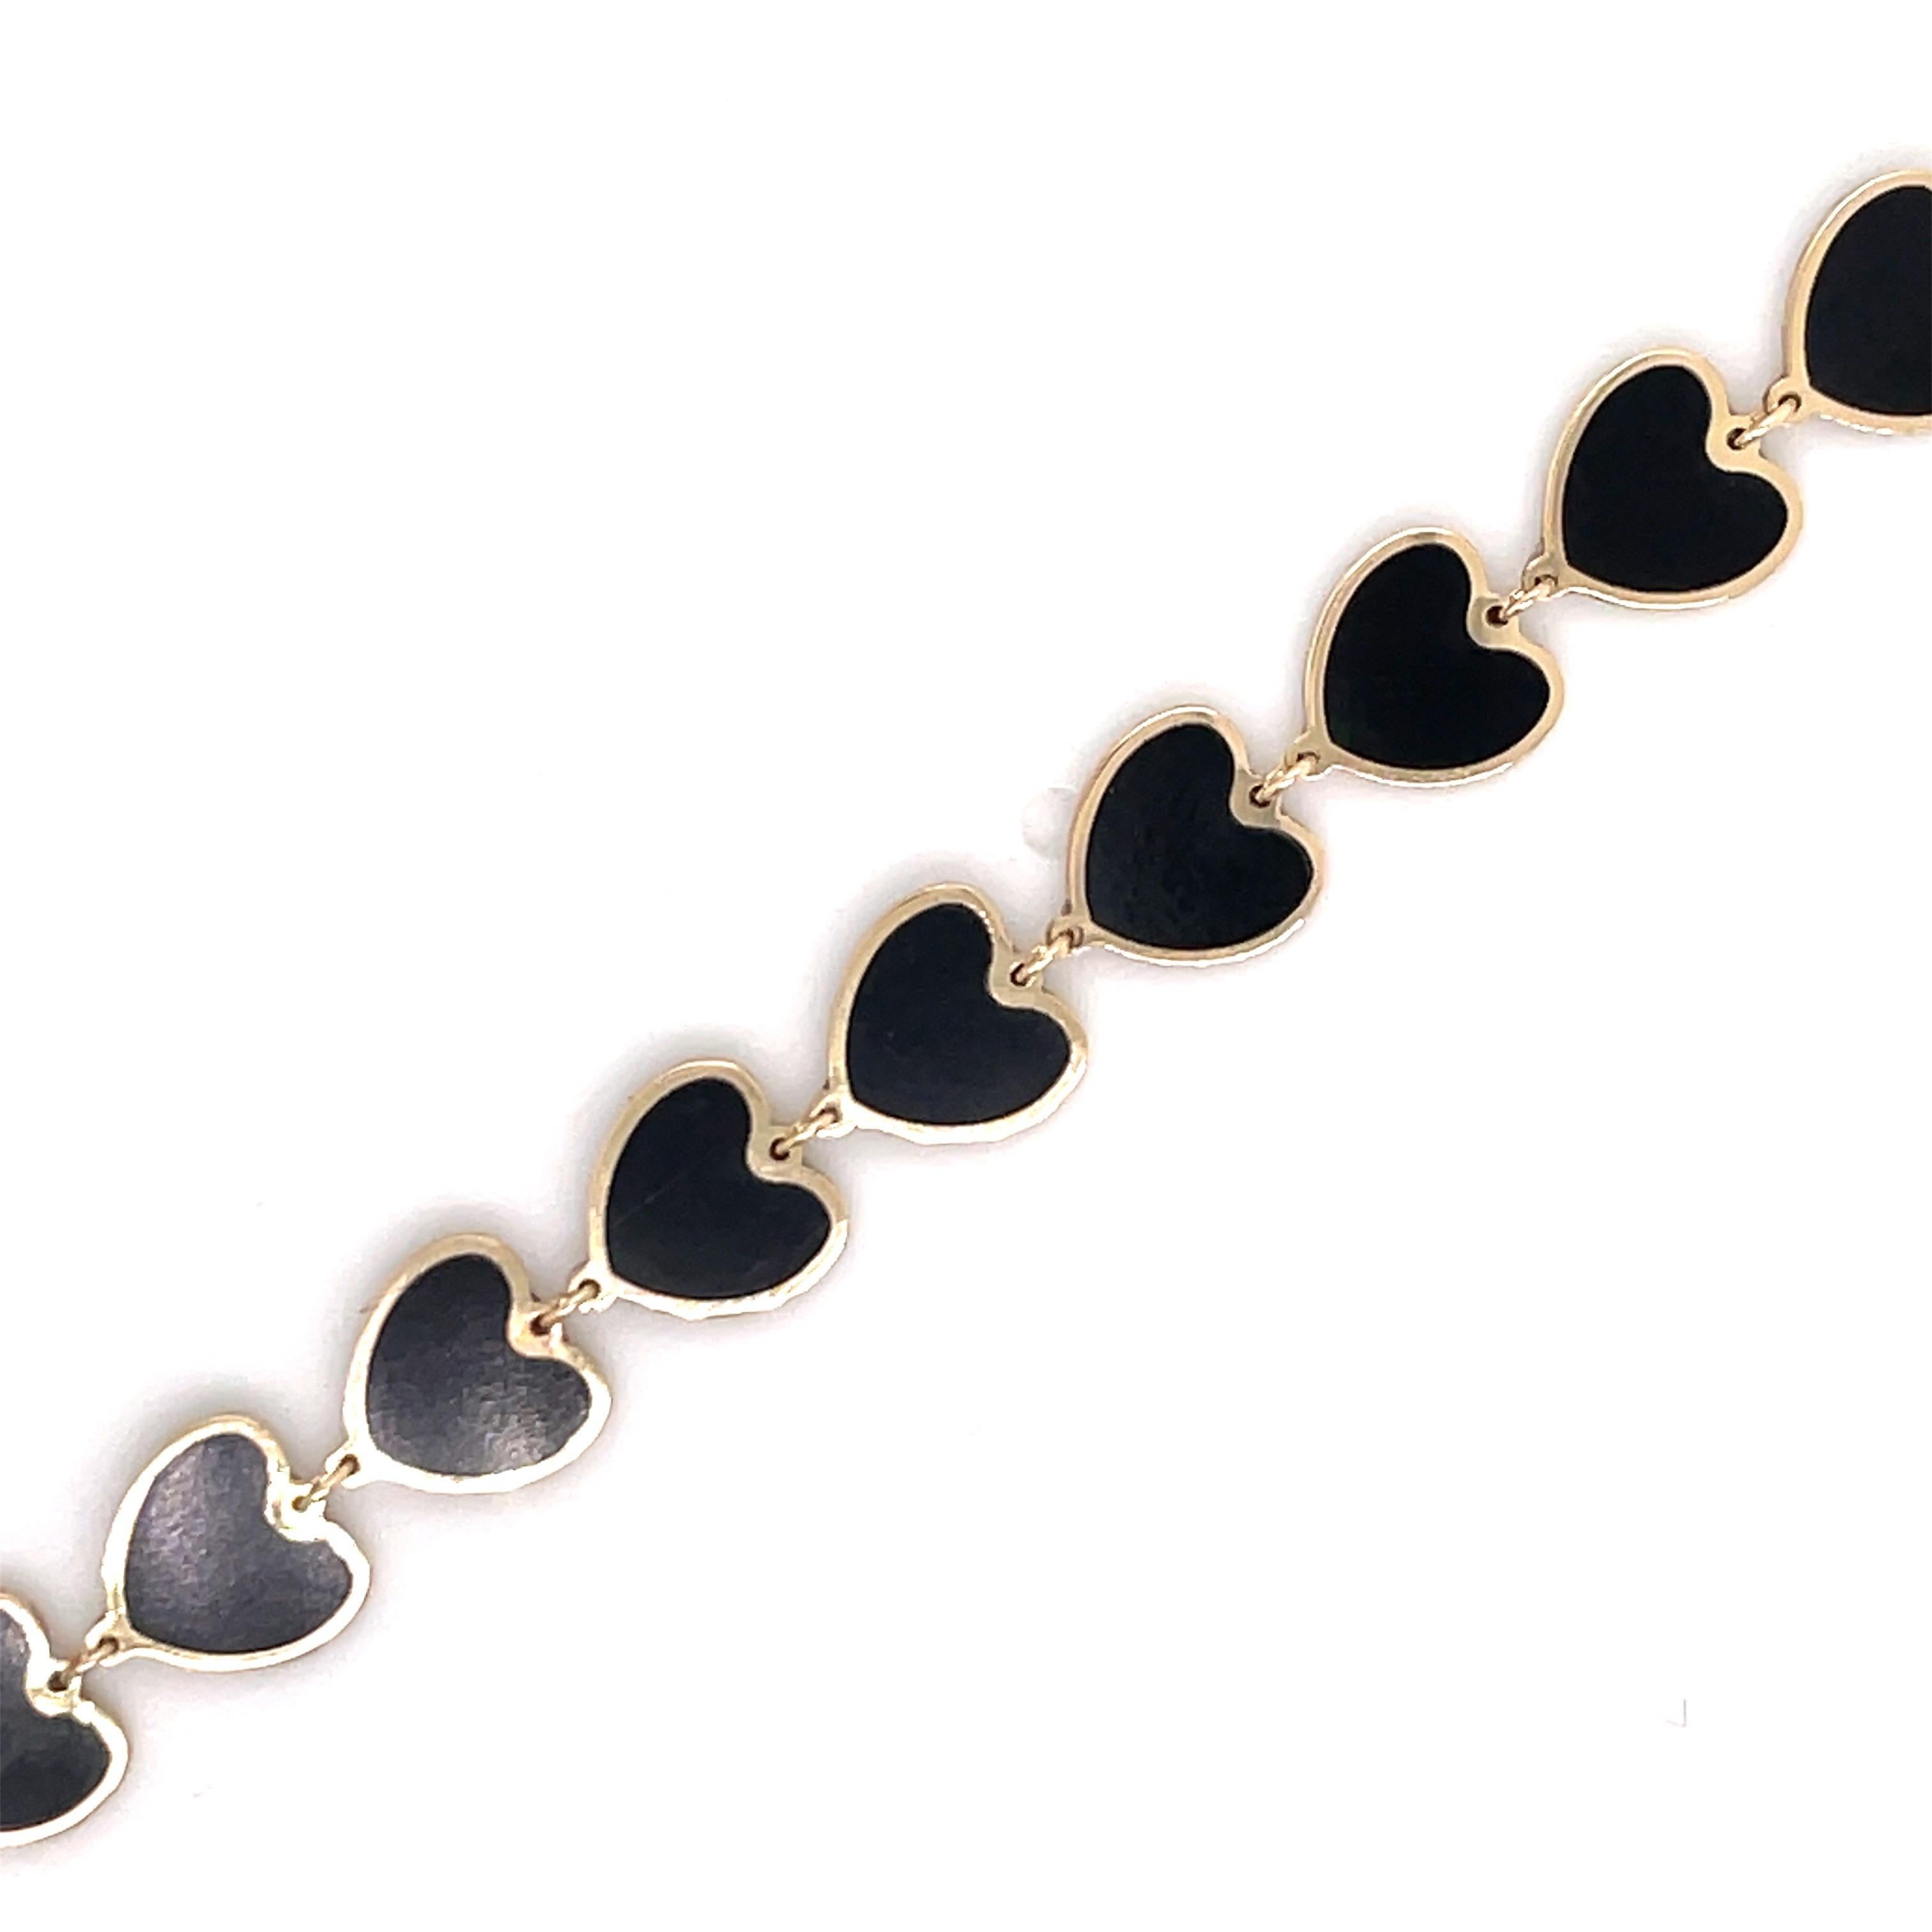 Italian 14k yellow gold heart onyx gold trim bracelet. 
Super fun and trendy! 
Available in different colors and styles. 